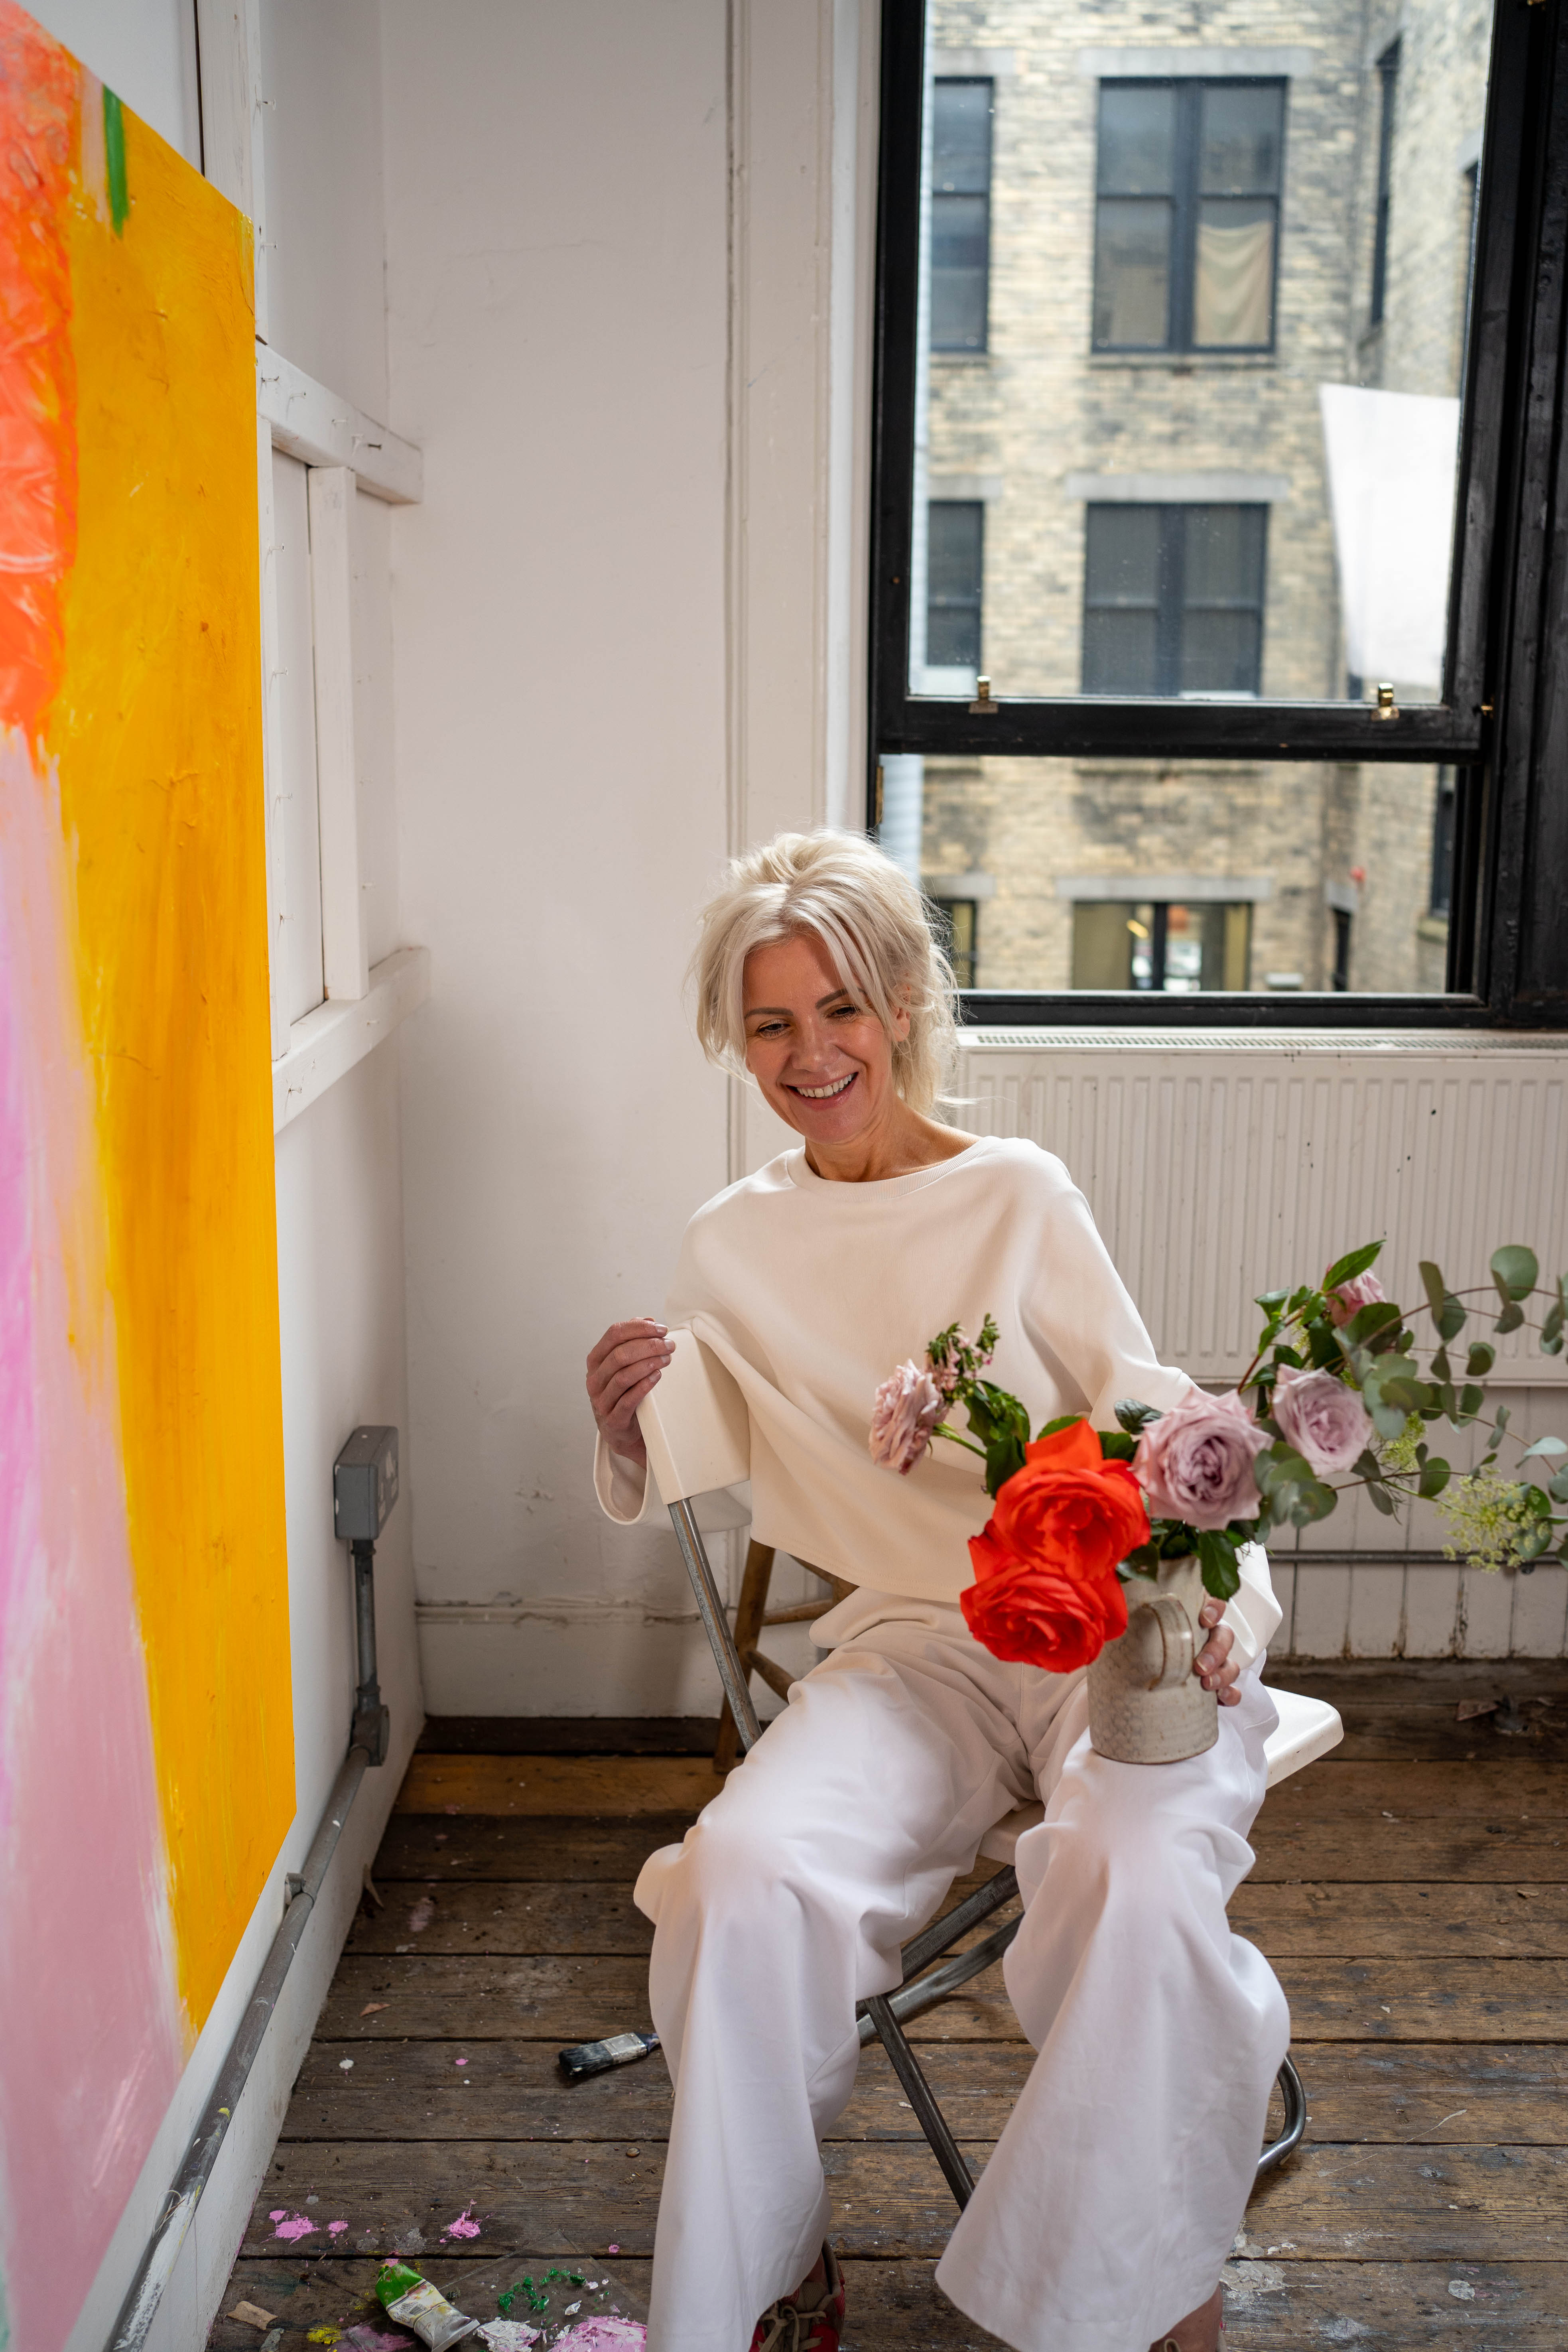 Alison McWhirter dressed in white holding a vase of flowers in front of one of her paintings